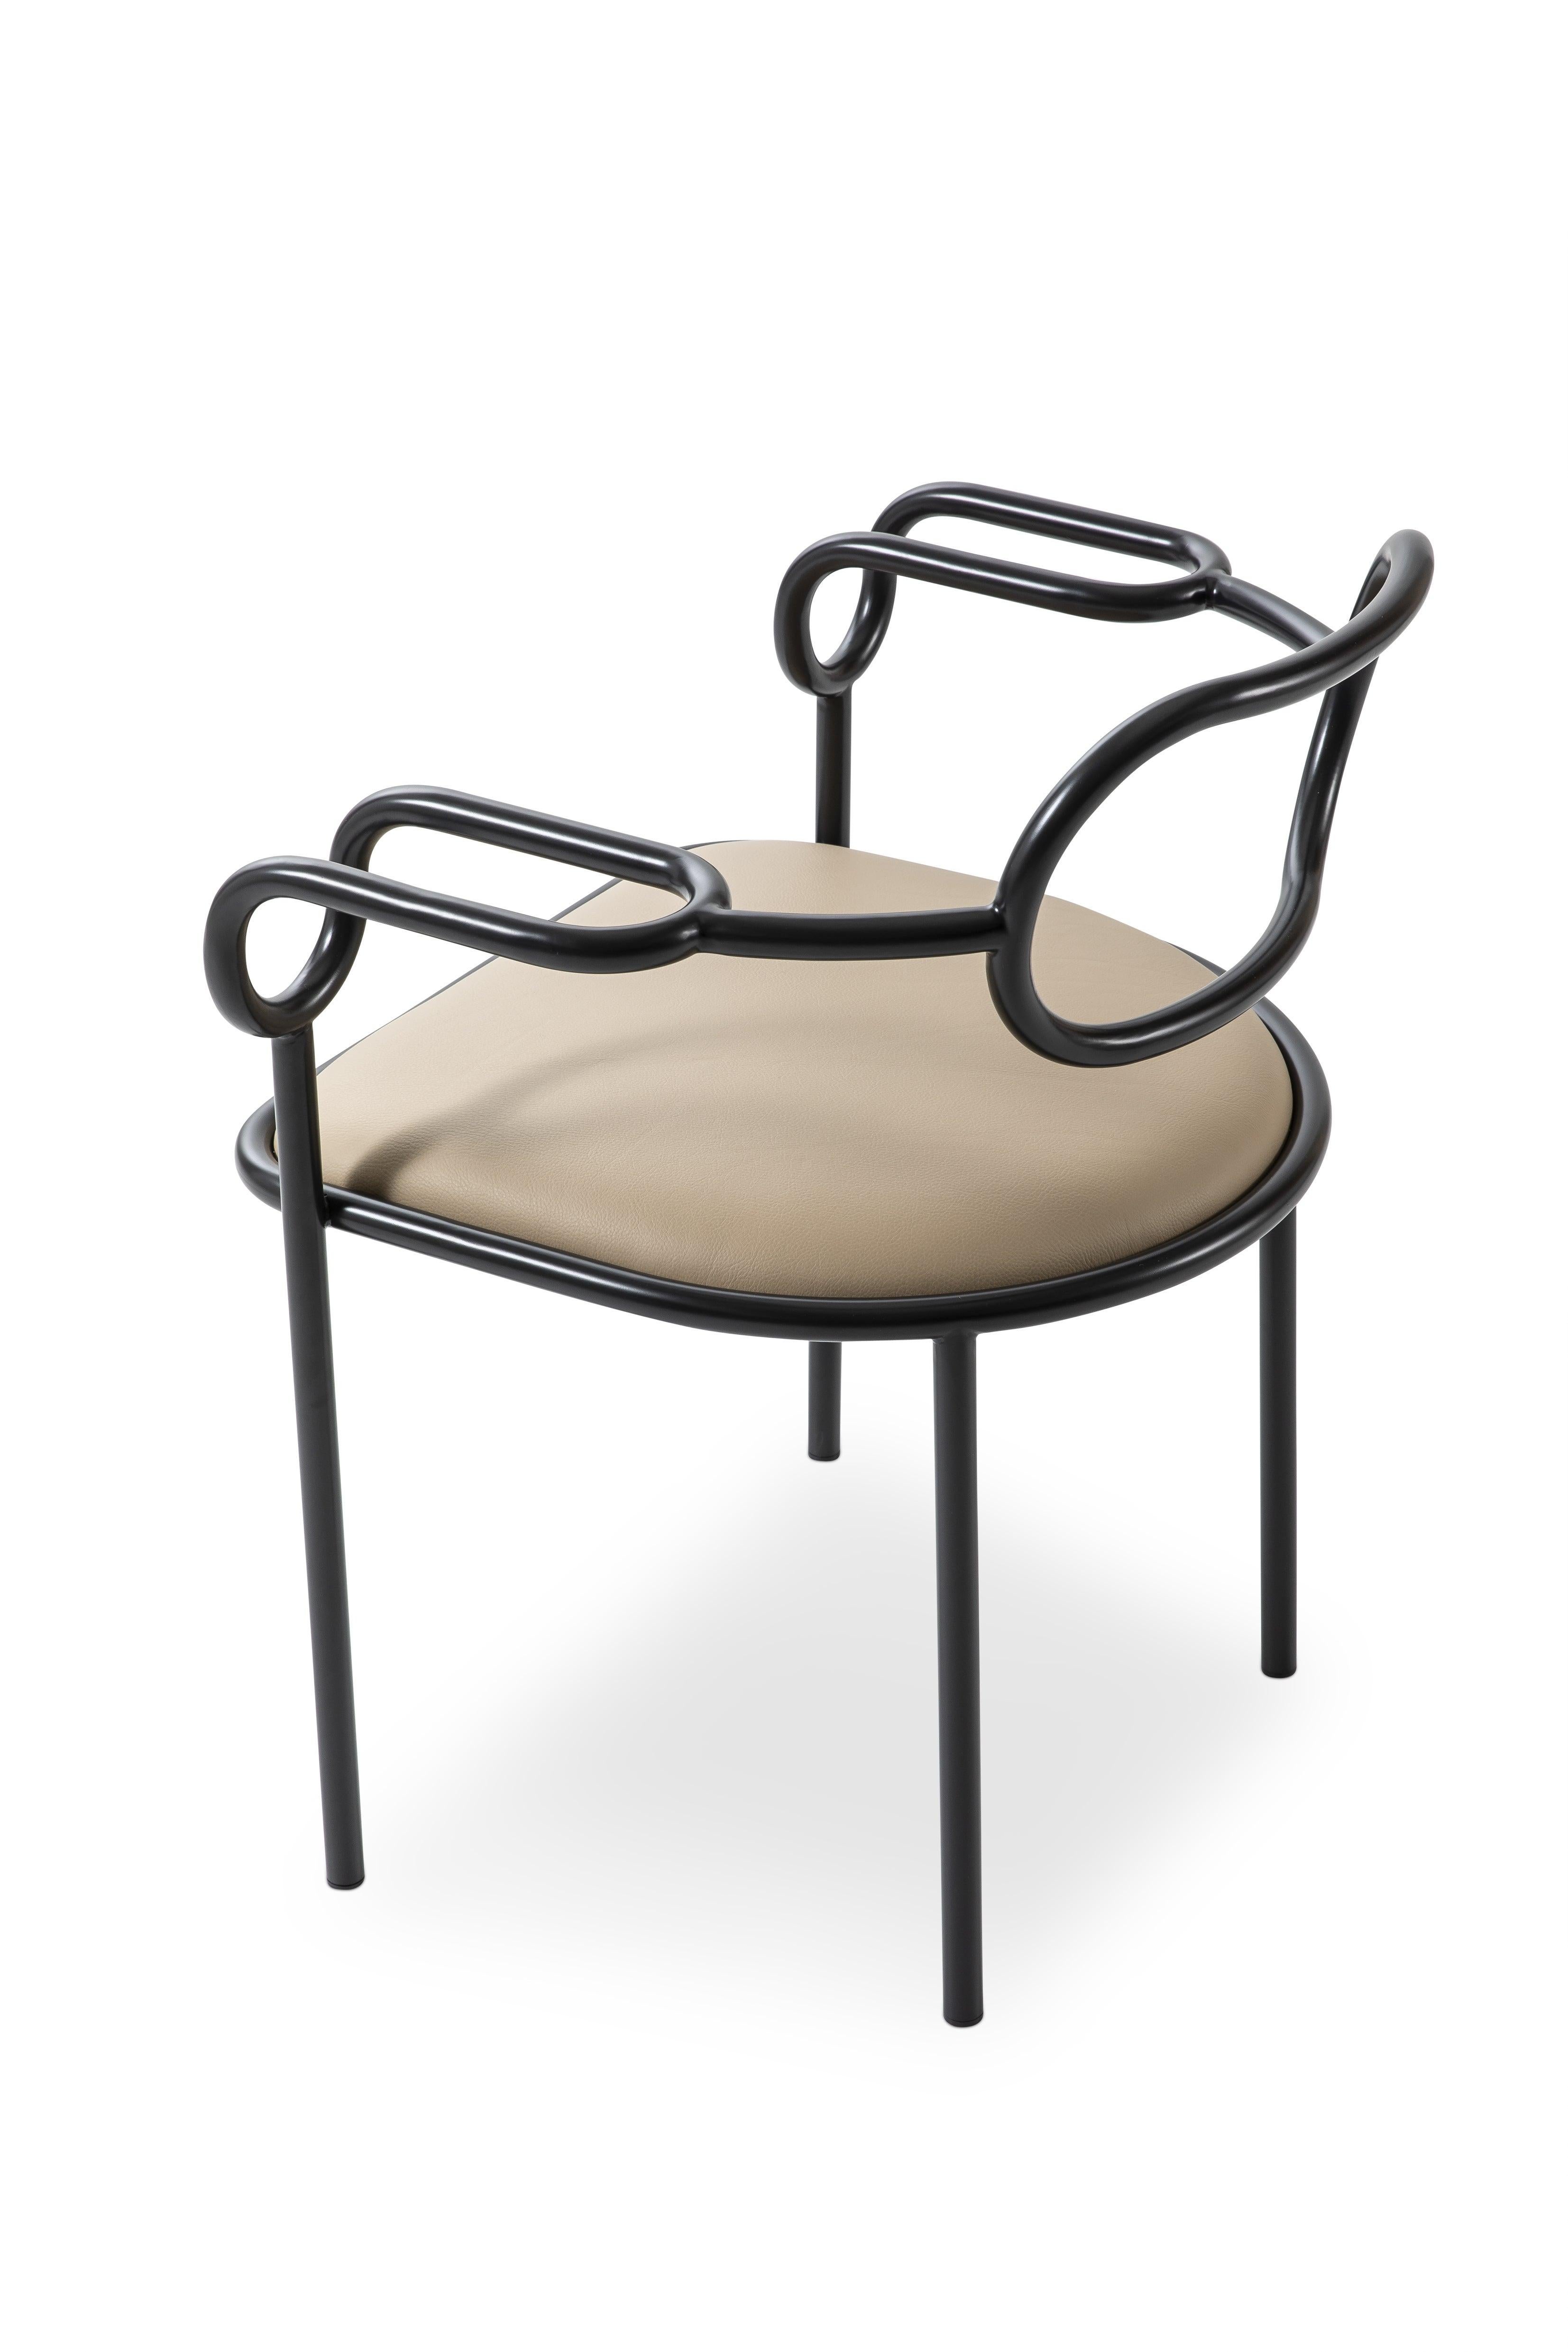 Modern Shiro Kuramata 01 Chair in Anthracite Base and Cream Leather Seat for Cappellini For Sale